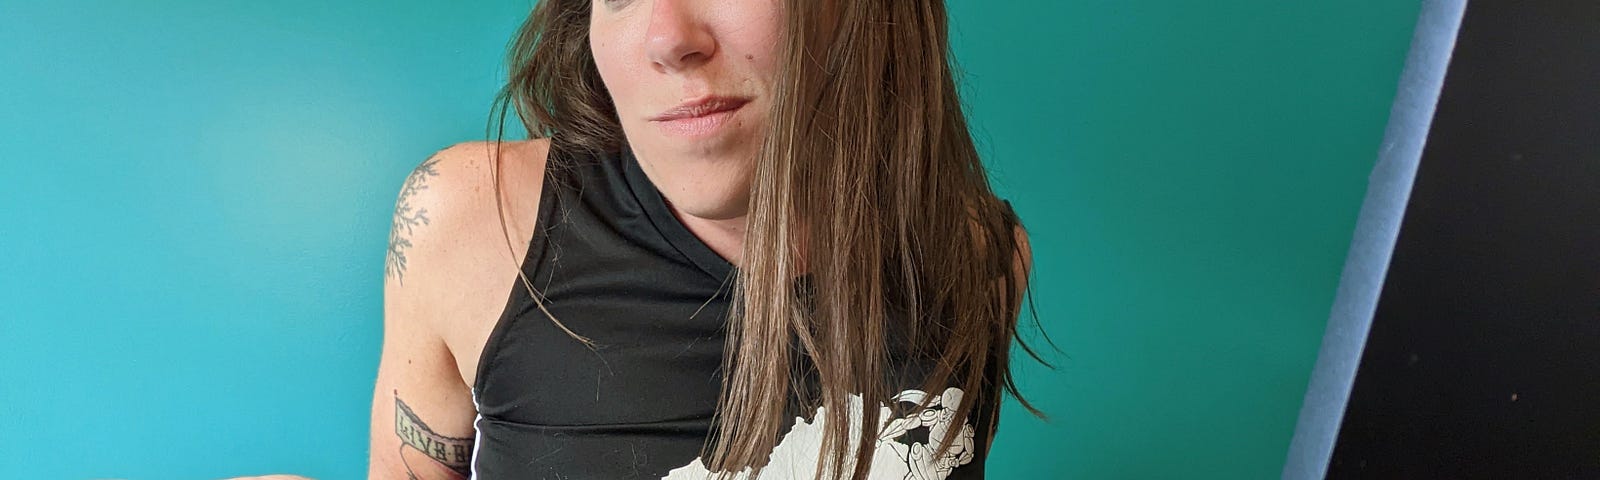 Heather Gioia, white female with long brown hair, is sitting in front of a green wall with a laptop. Heather is shrugging her shoulders. She is wearing a black top with the Virginia All Stars Roller Derby logo on the front in white.